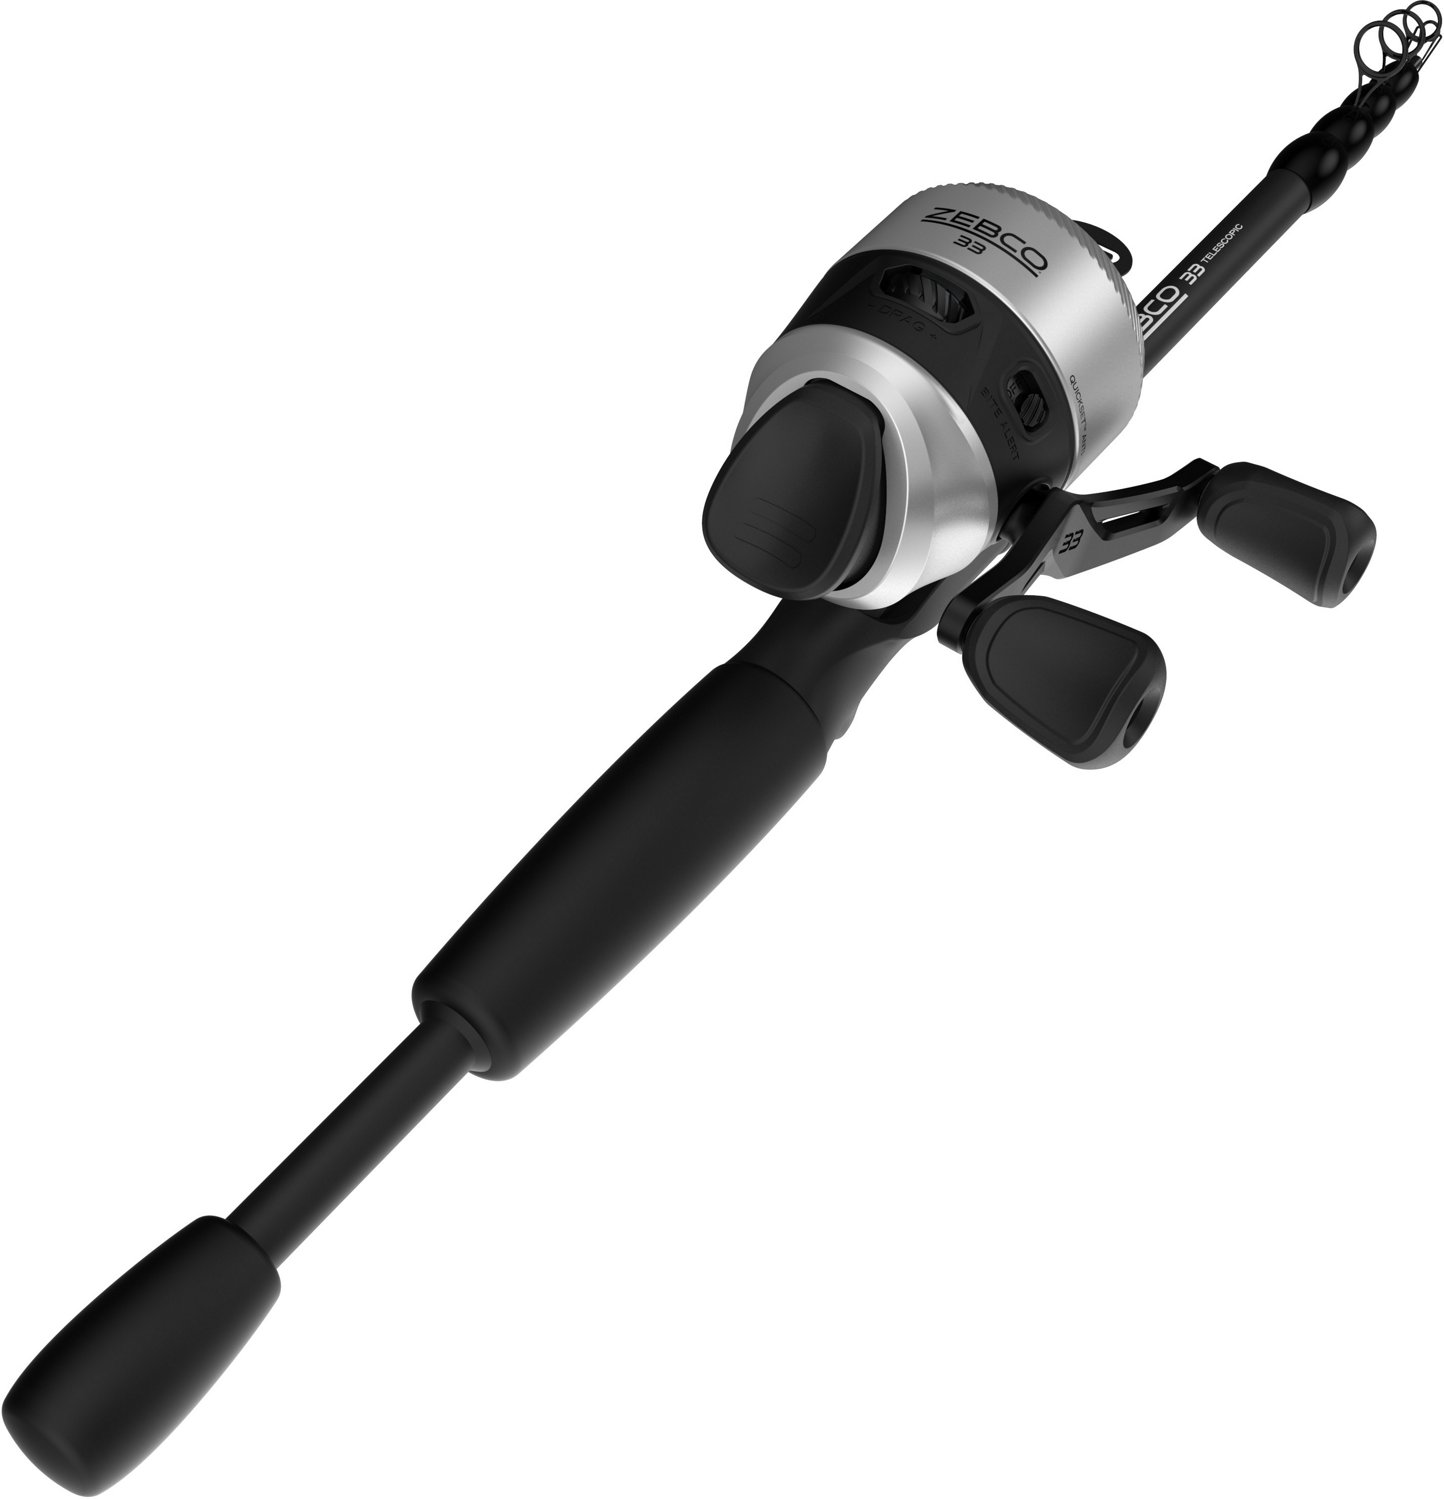 Zebco 33 Spincast Reel and 2-Piece Fishing Rod Combo 5-Foot 6-Inch